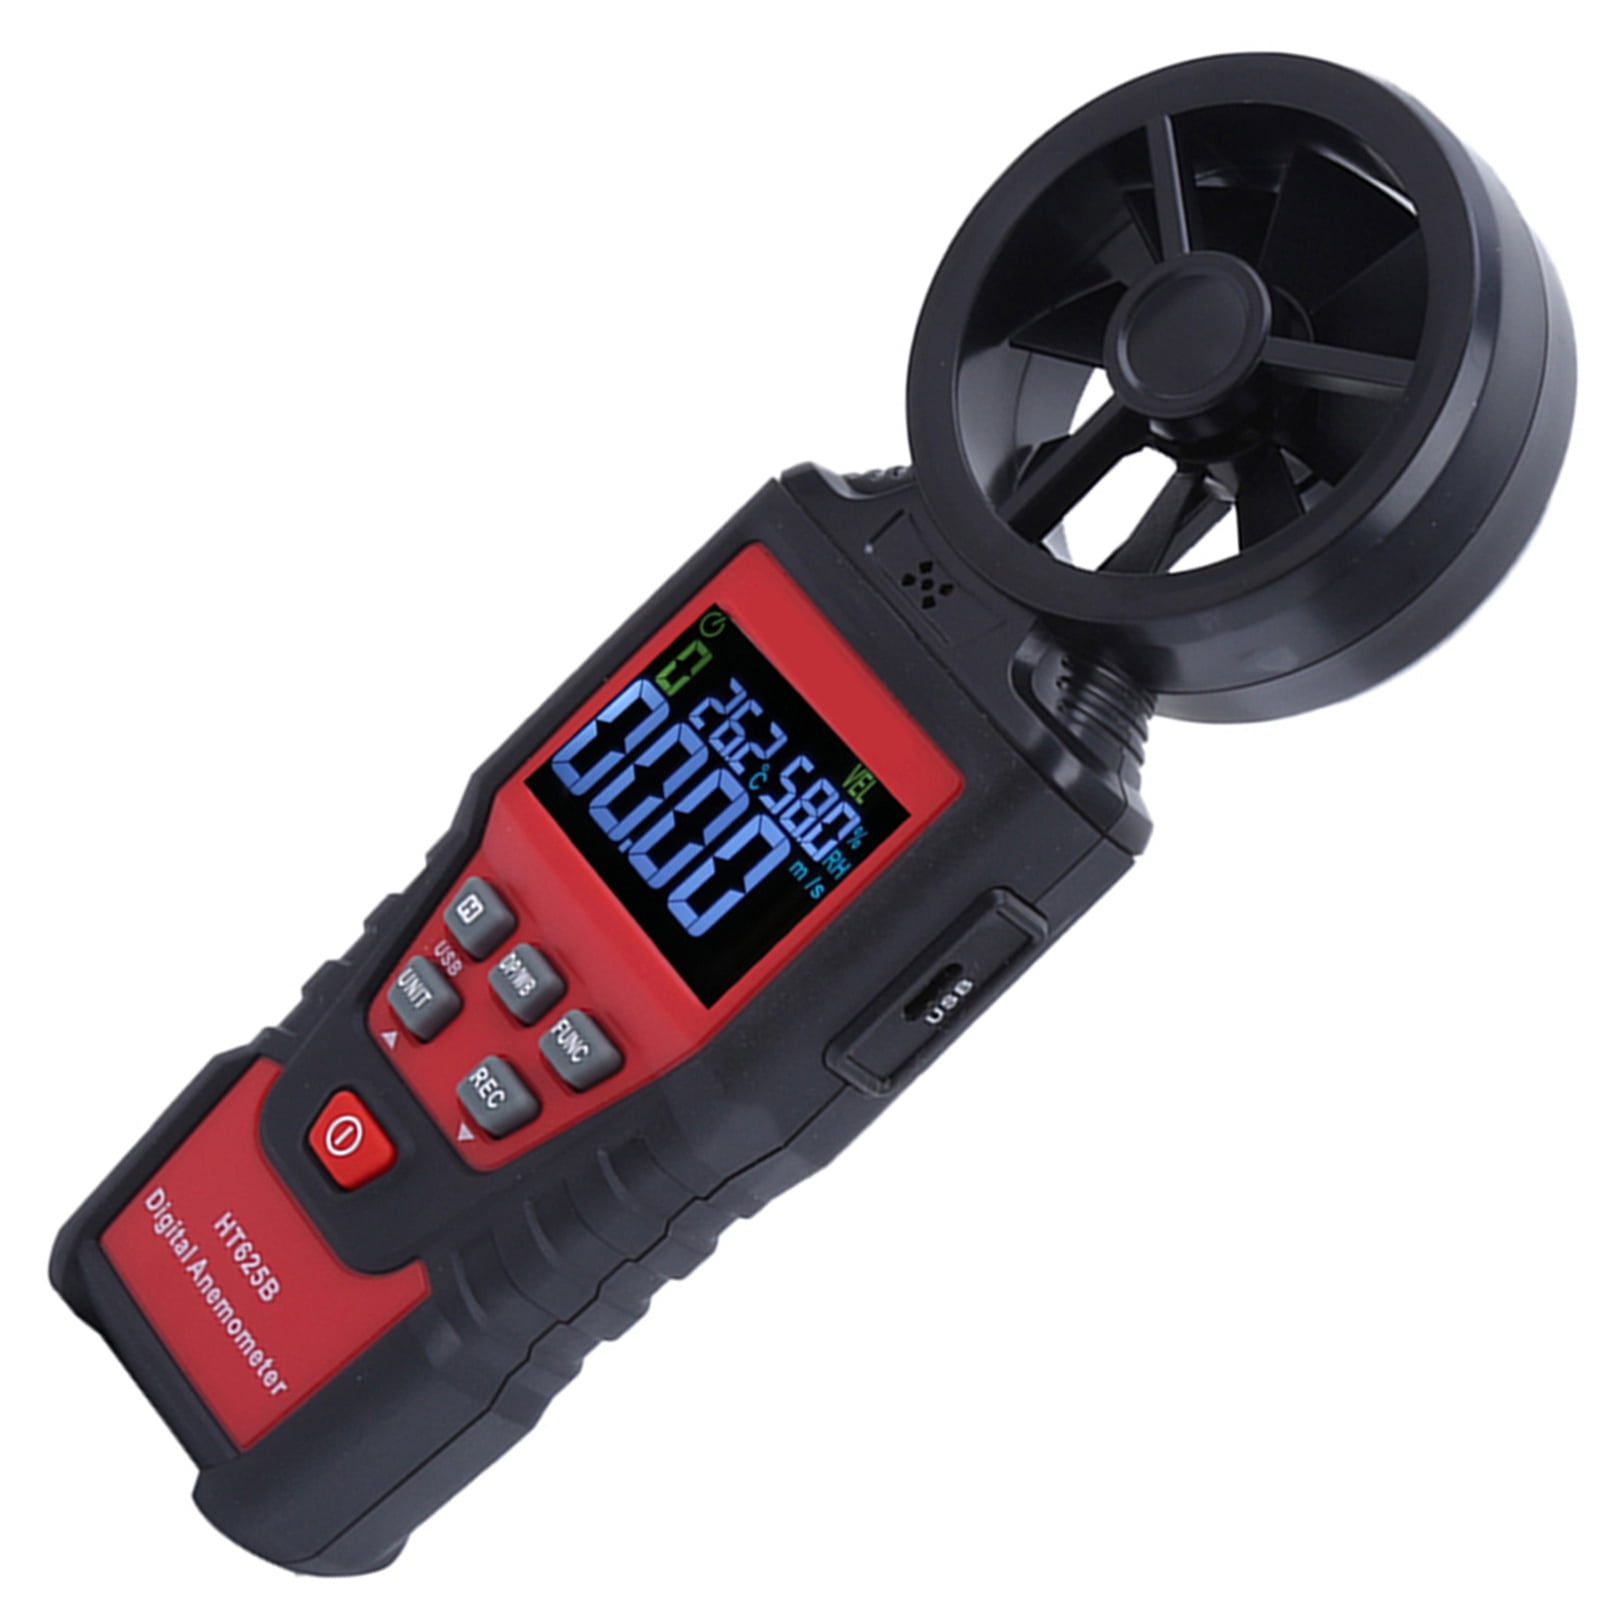 Heat Index Wind Chill KASUNTEST 8-in-1 Handheld Digital Anemometer Weather Meter with Temperature Humidity Altitude Barometer KT-302 Dewpoint